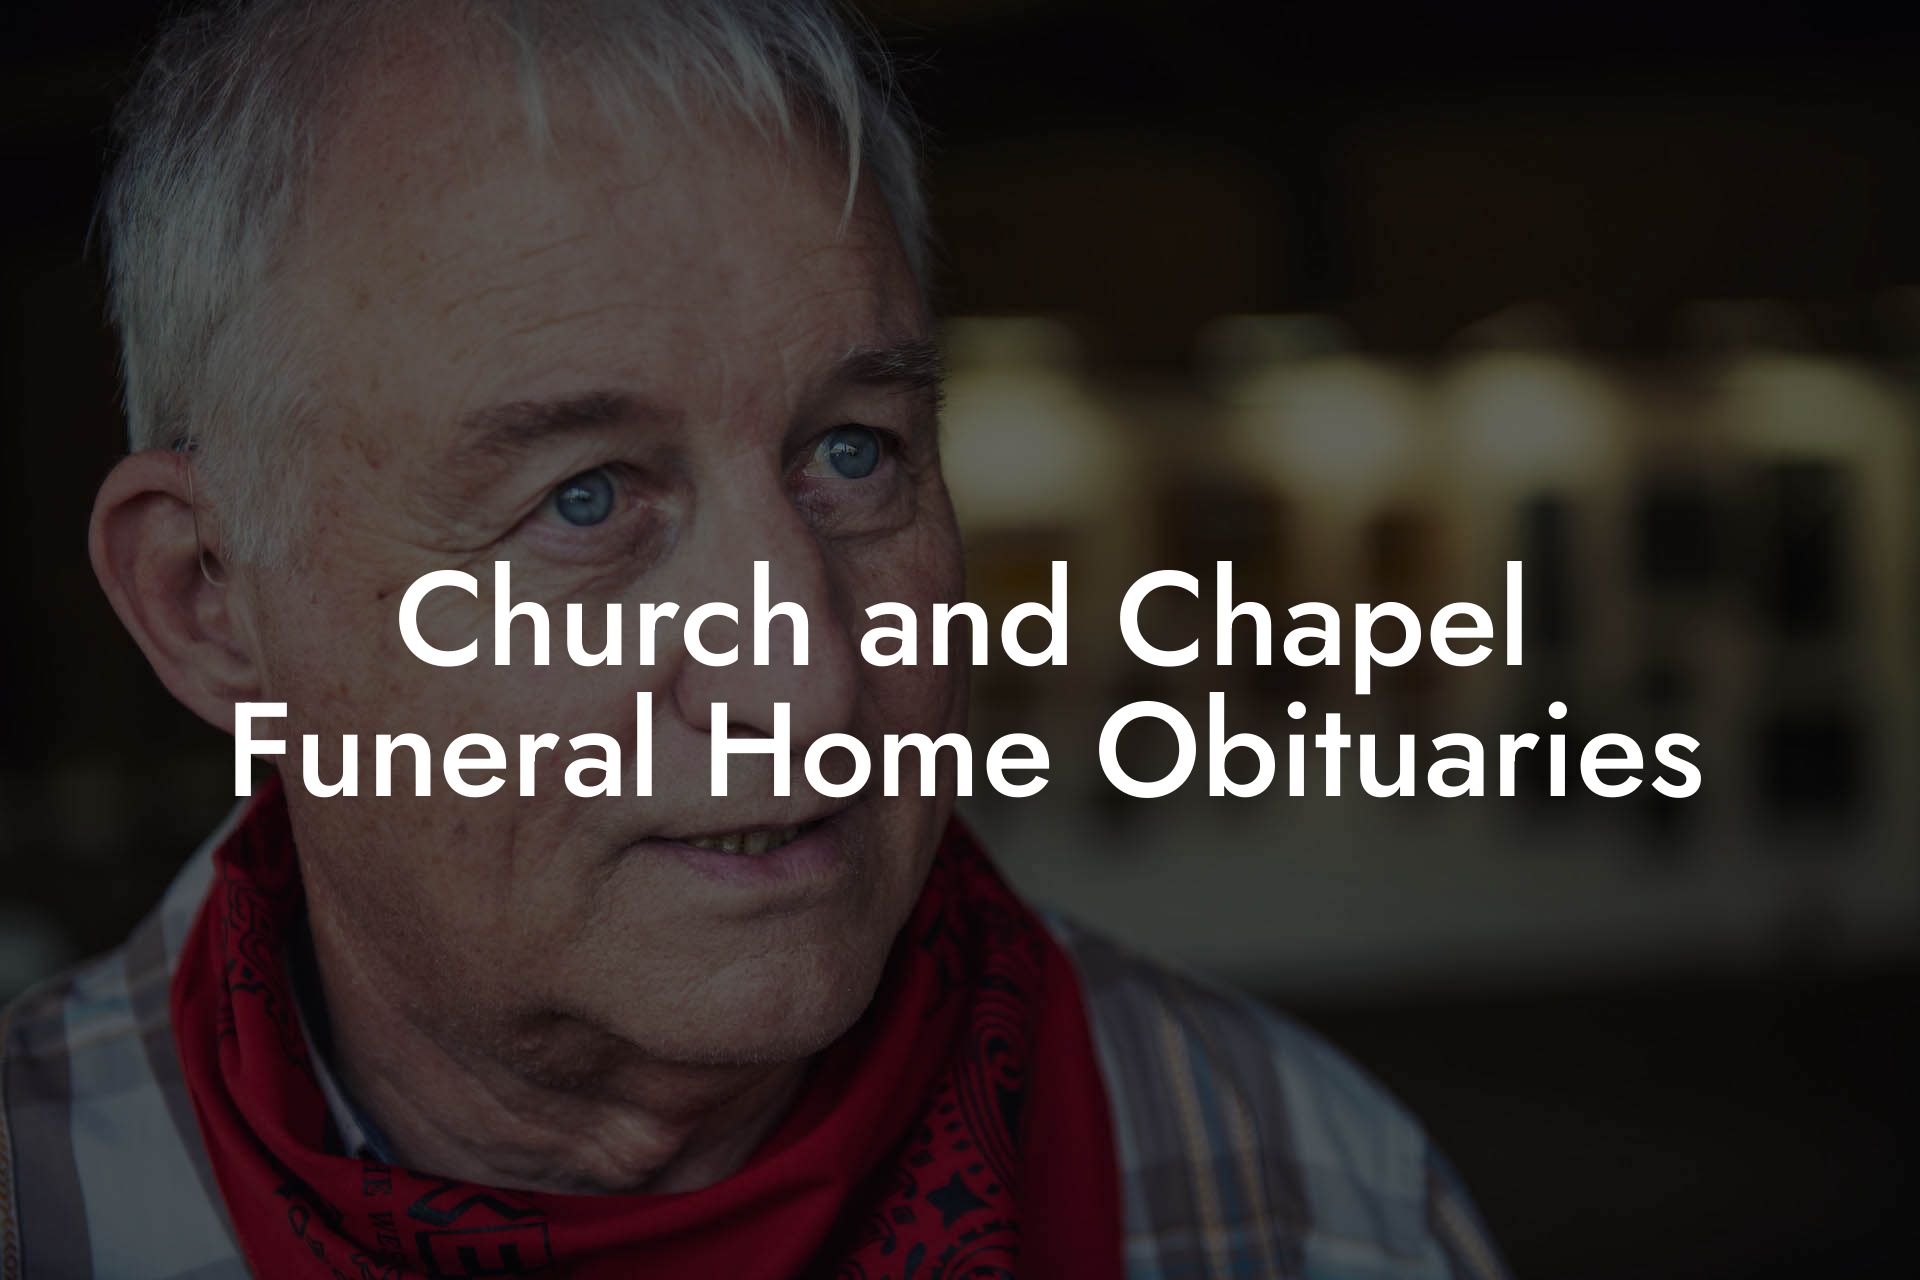 Church and Chapel Funeral Home Obituaries